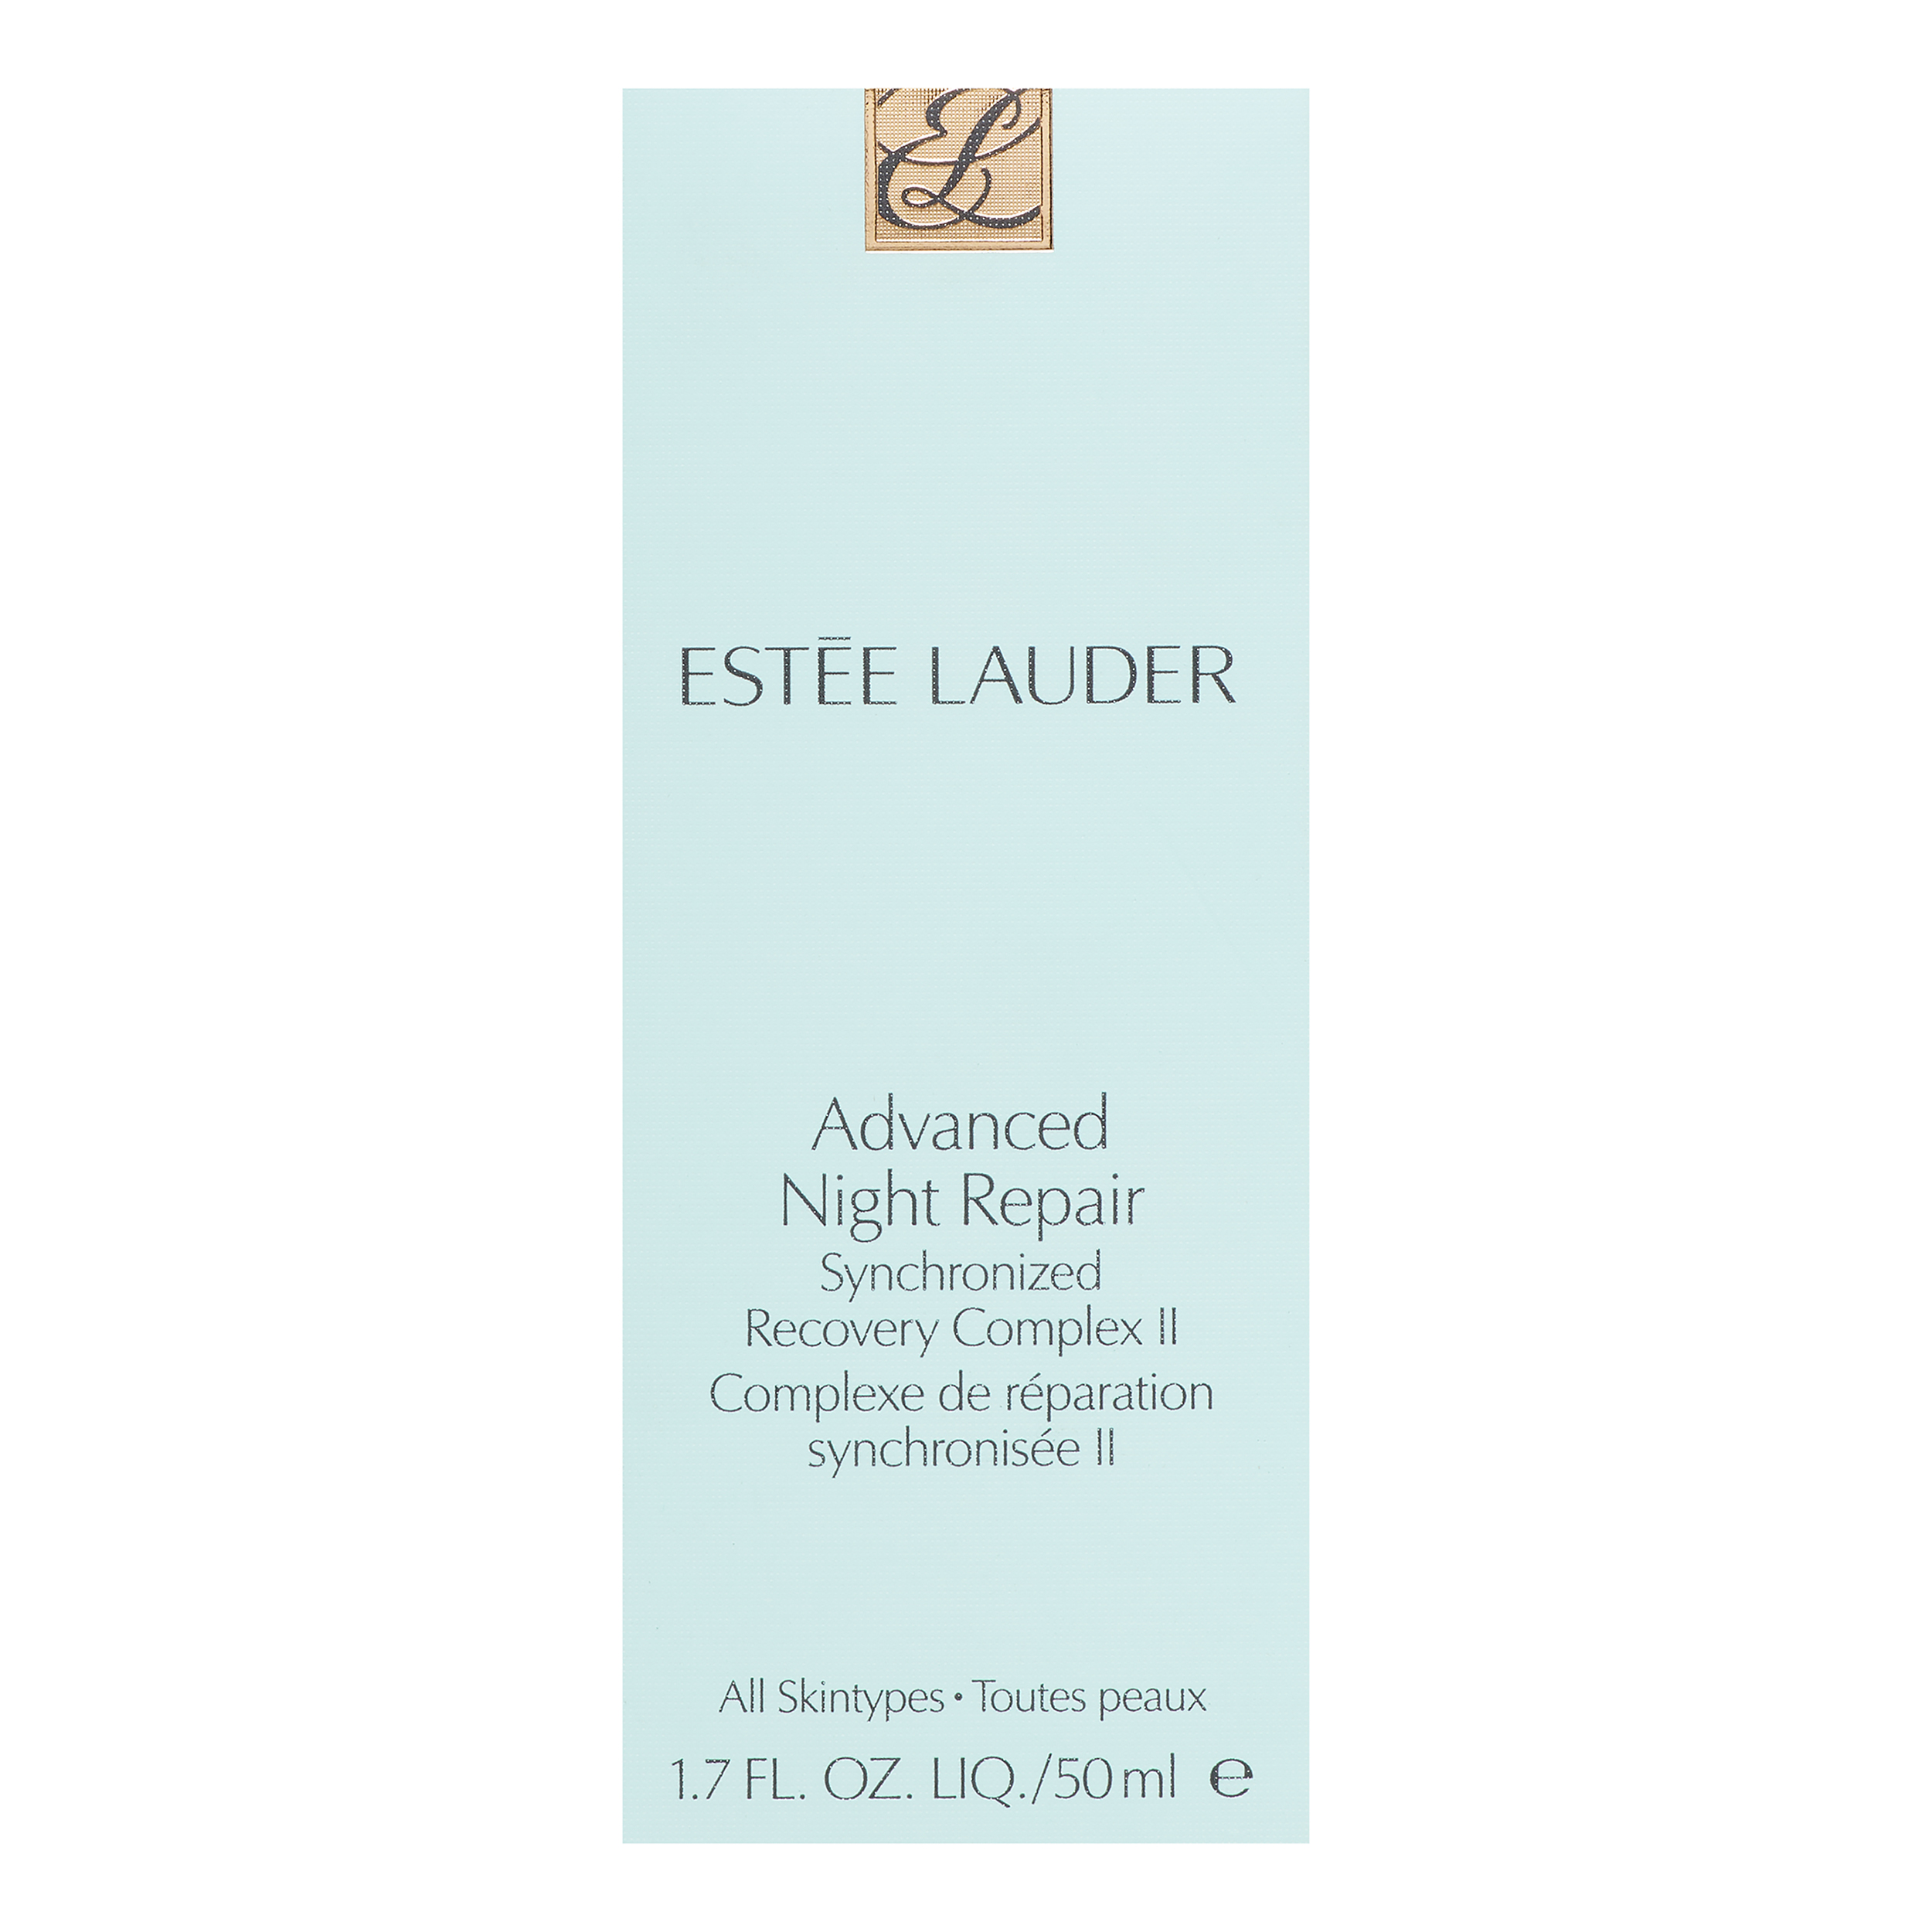 (Deal: 20% Off) Estee Lauder Advanced Night Repair Synchronized Recovery Complex II Face Serum, 1.7 Oz - image 5 of 6